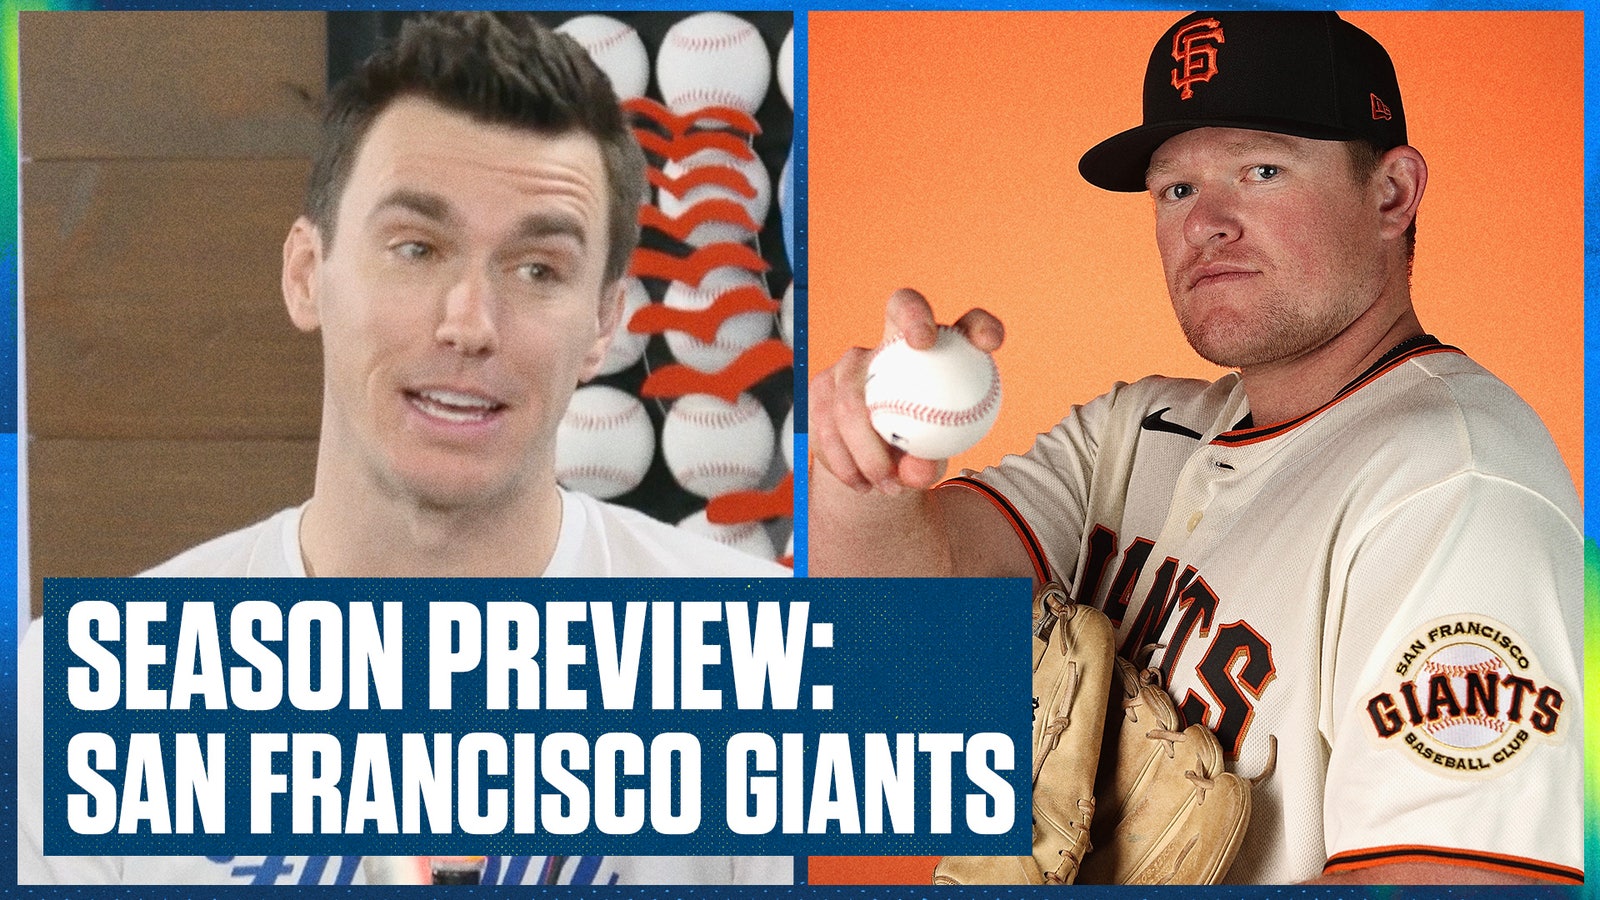 Giants Season Preview: Is the lineup healthy enough?